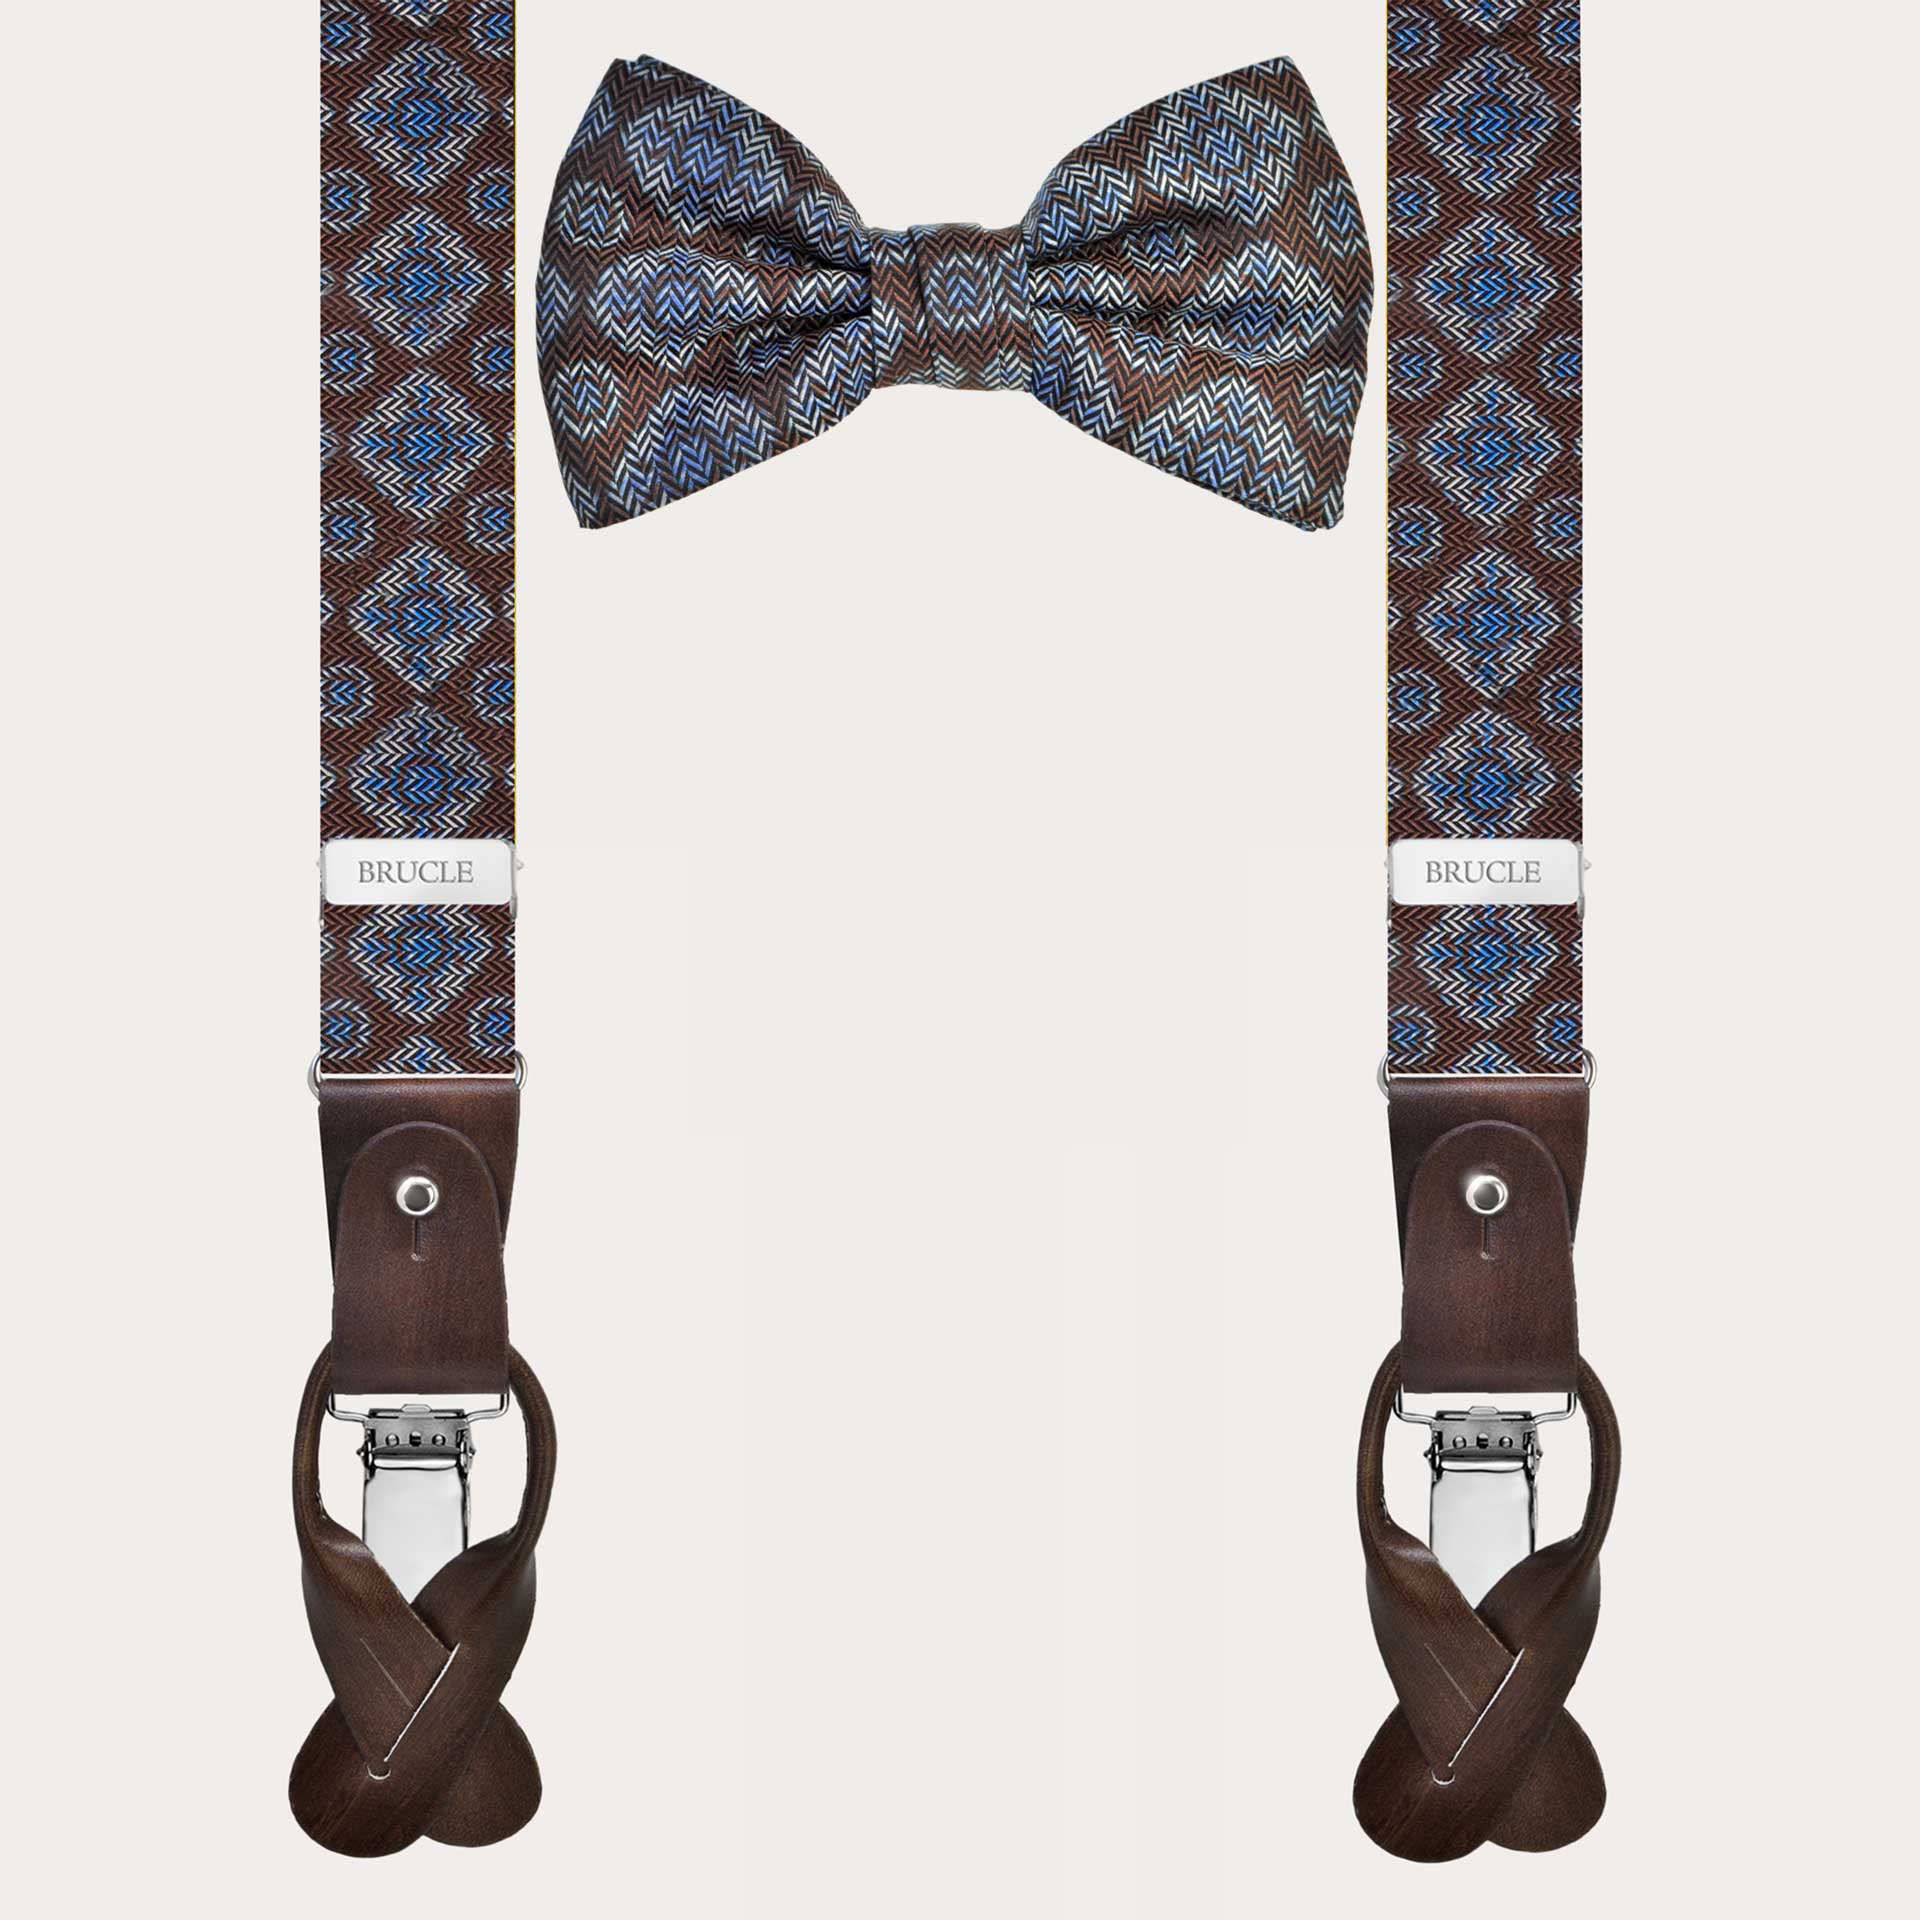 BRUCLE Exclusive thin silk suspender set in a brown pattern for buttons and a coordinated pre-tied bow tie